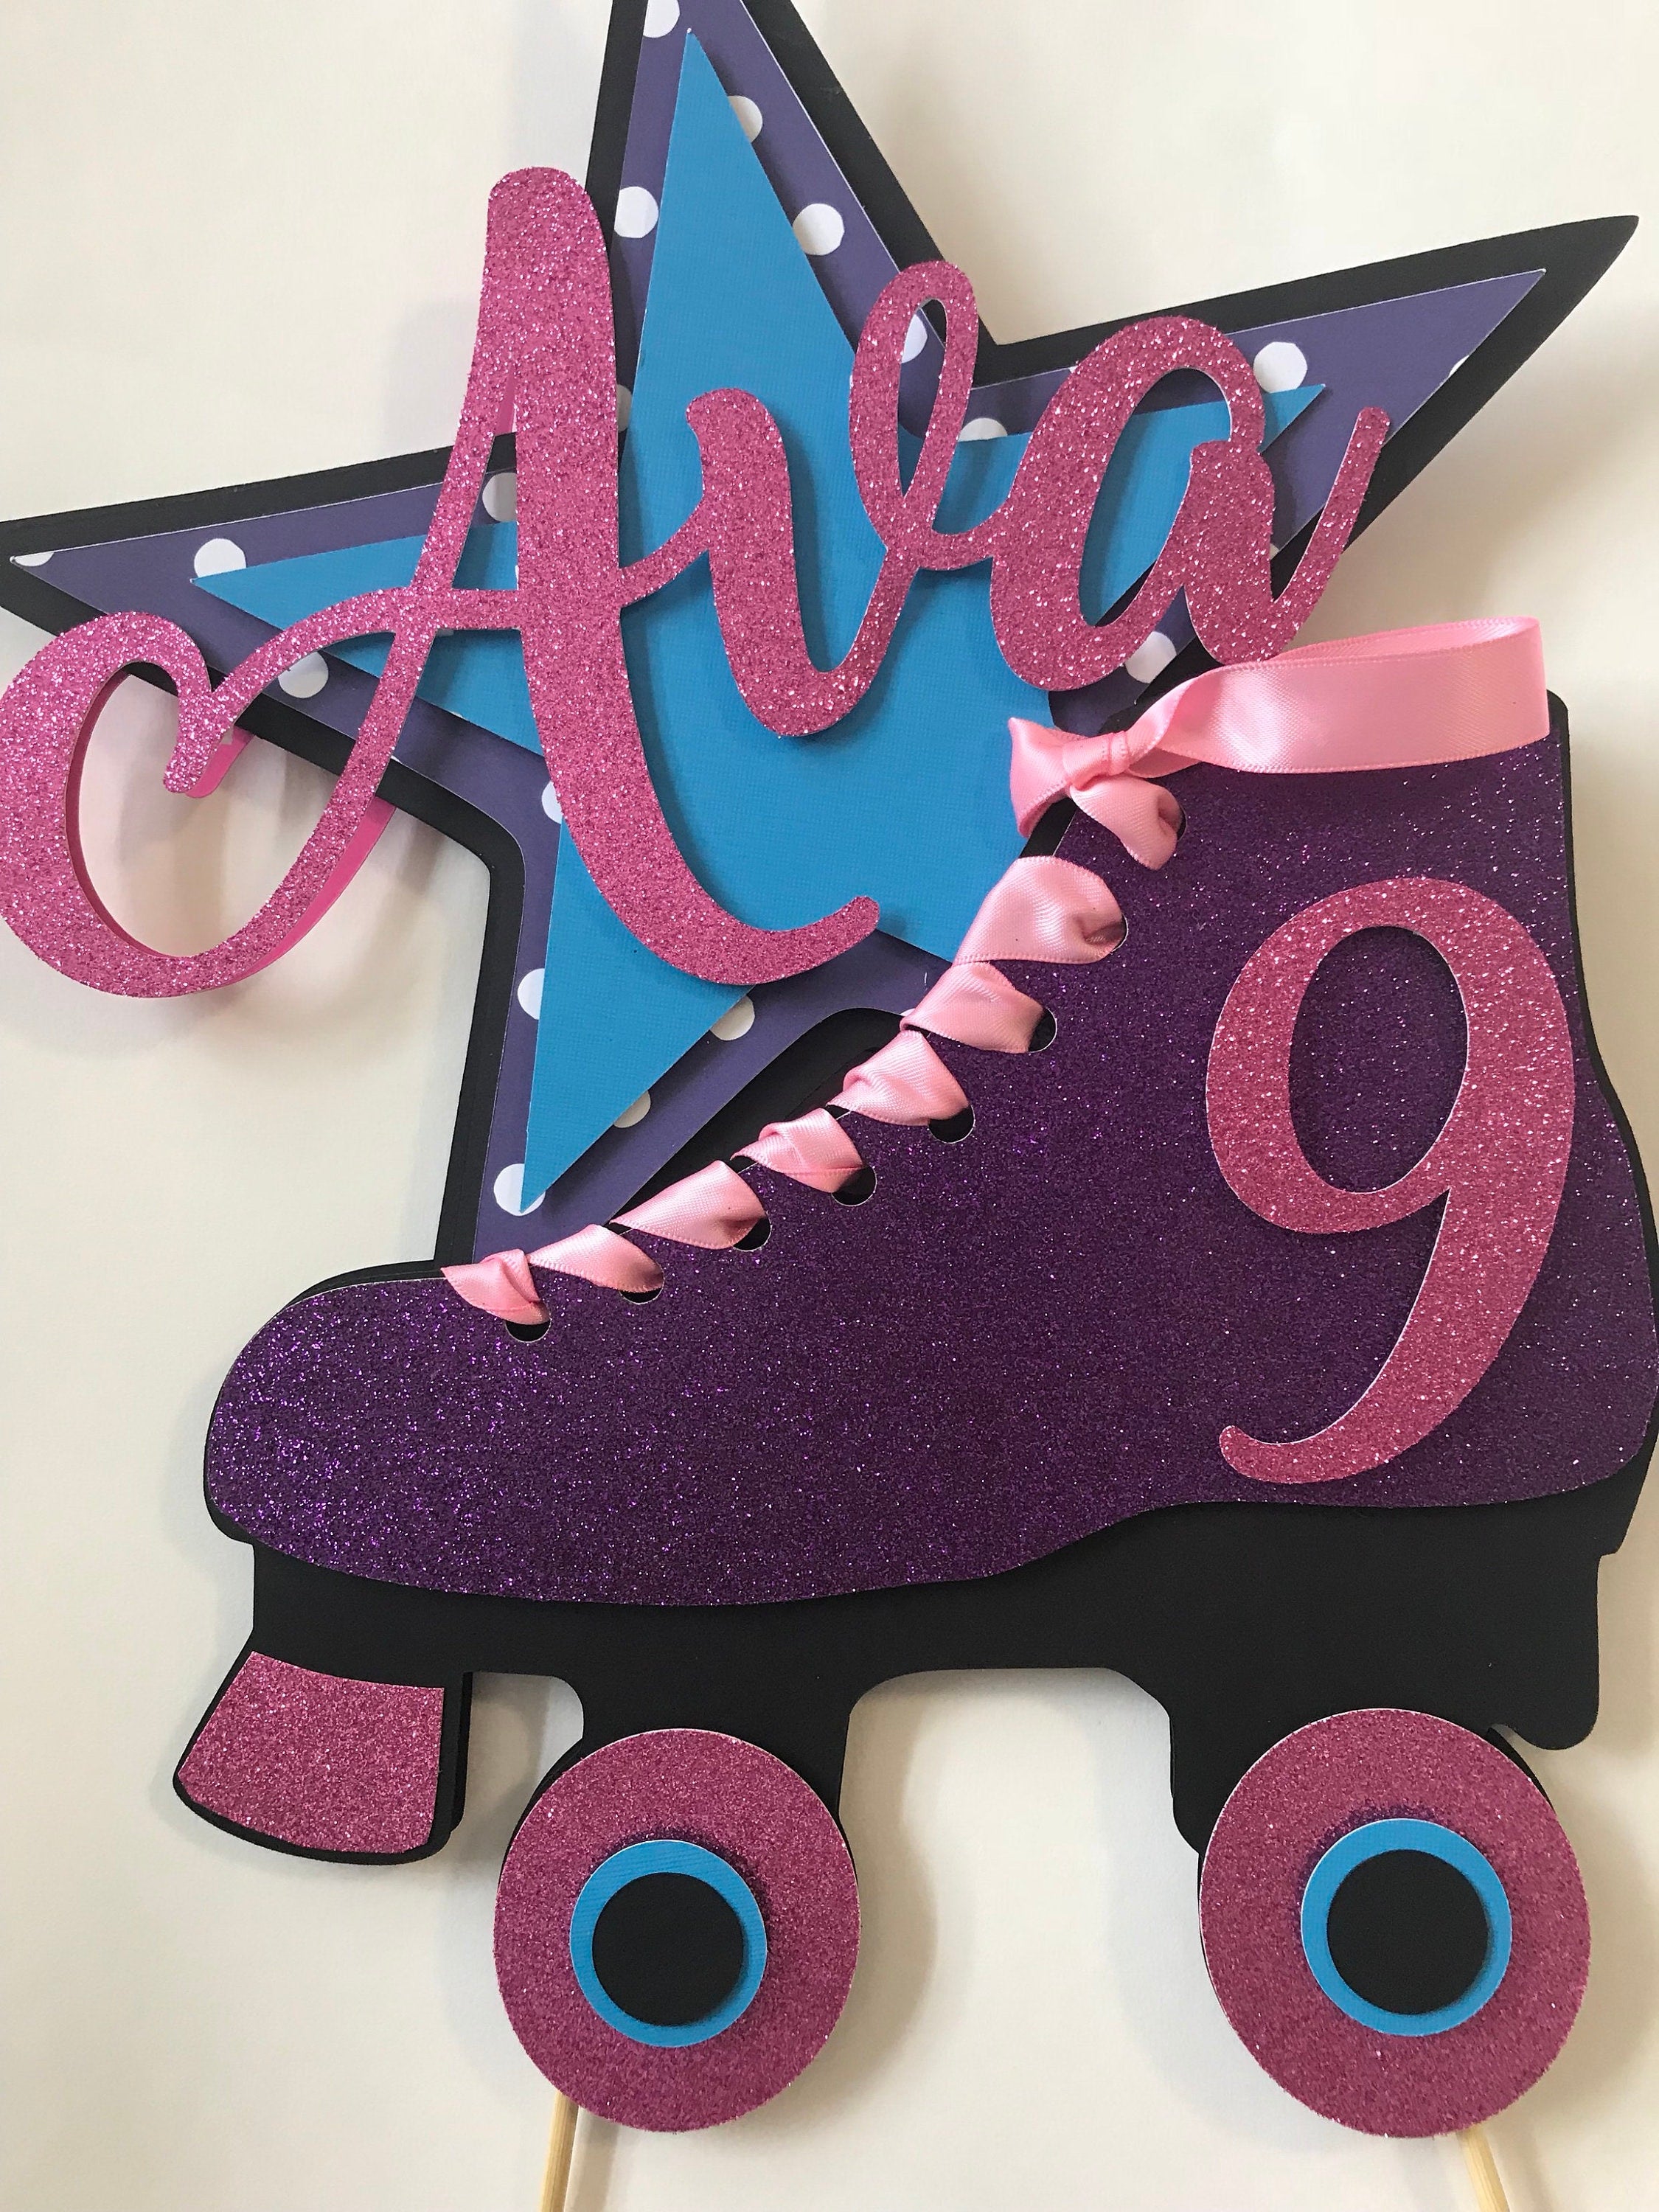 Buy WHITE ROLLER SKATES Edible Cake Topper Image Birthday Party Decoration  Online in India - Etsy